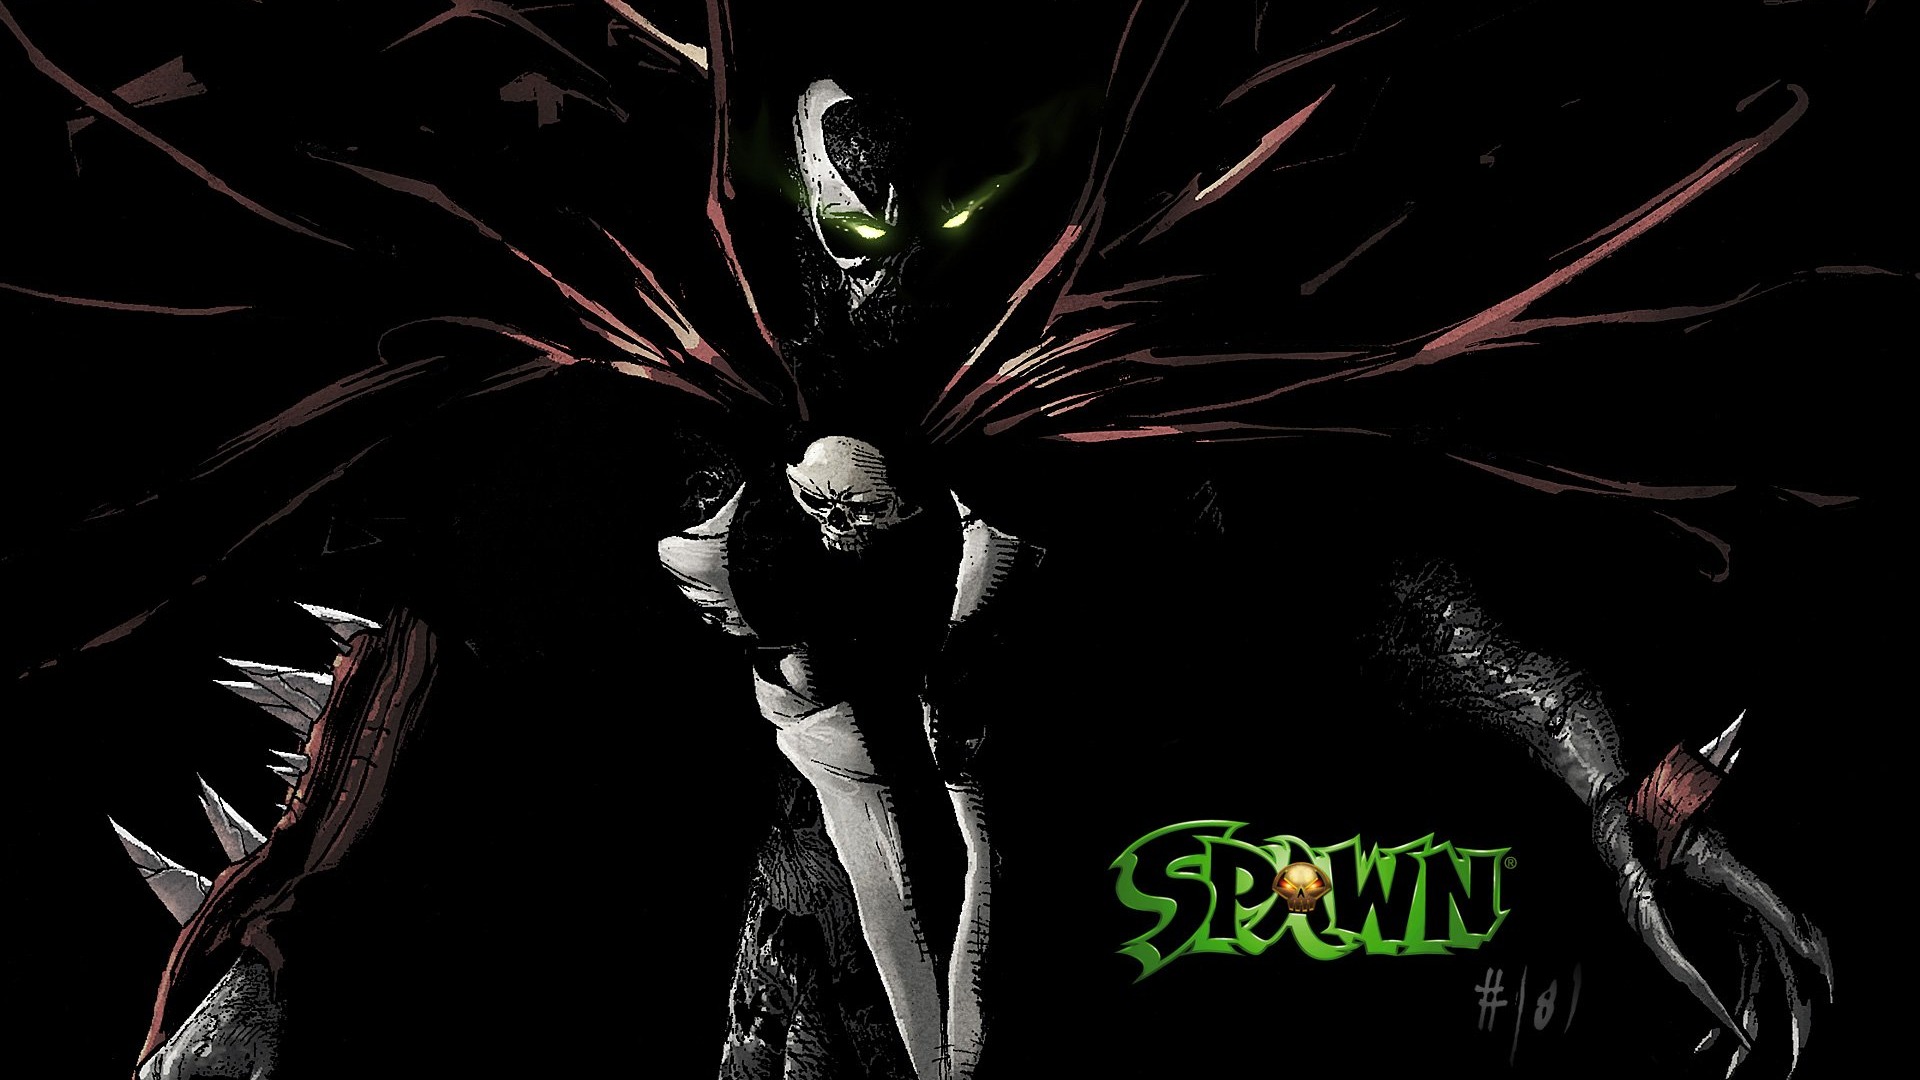 Spawn HD Wallpapers #21 - 1920x1080